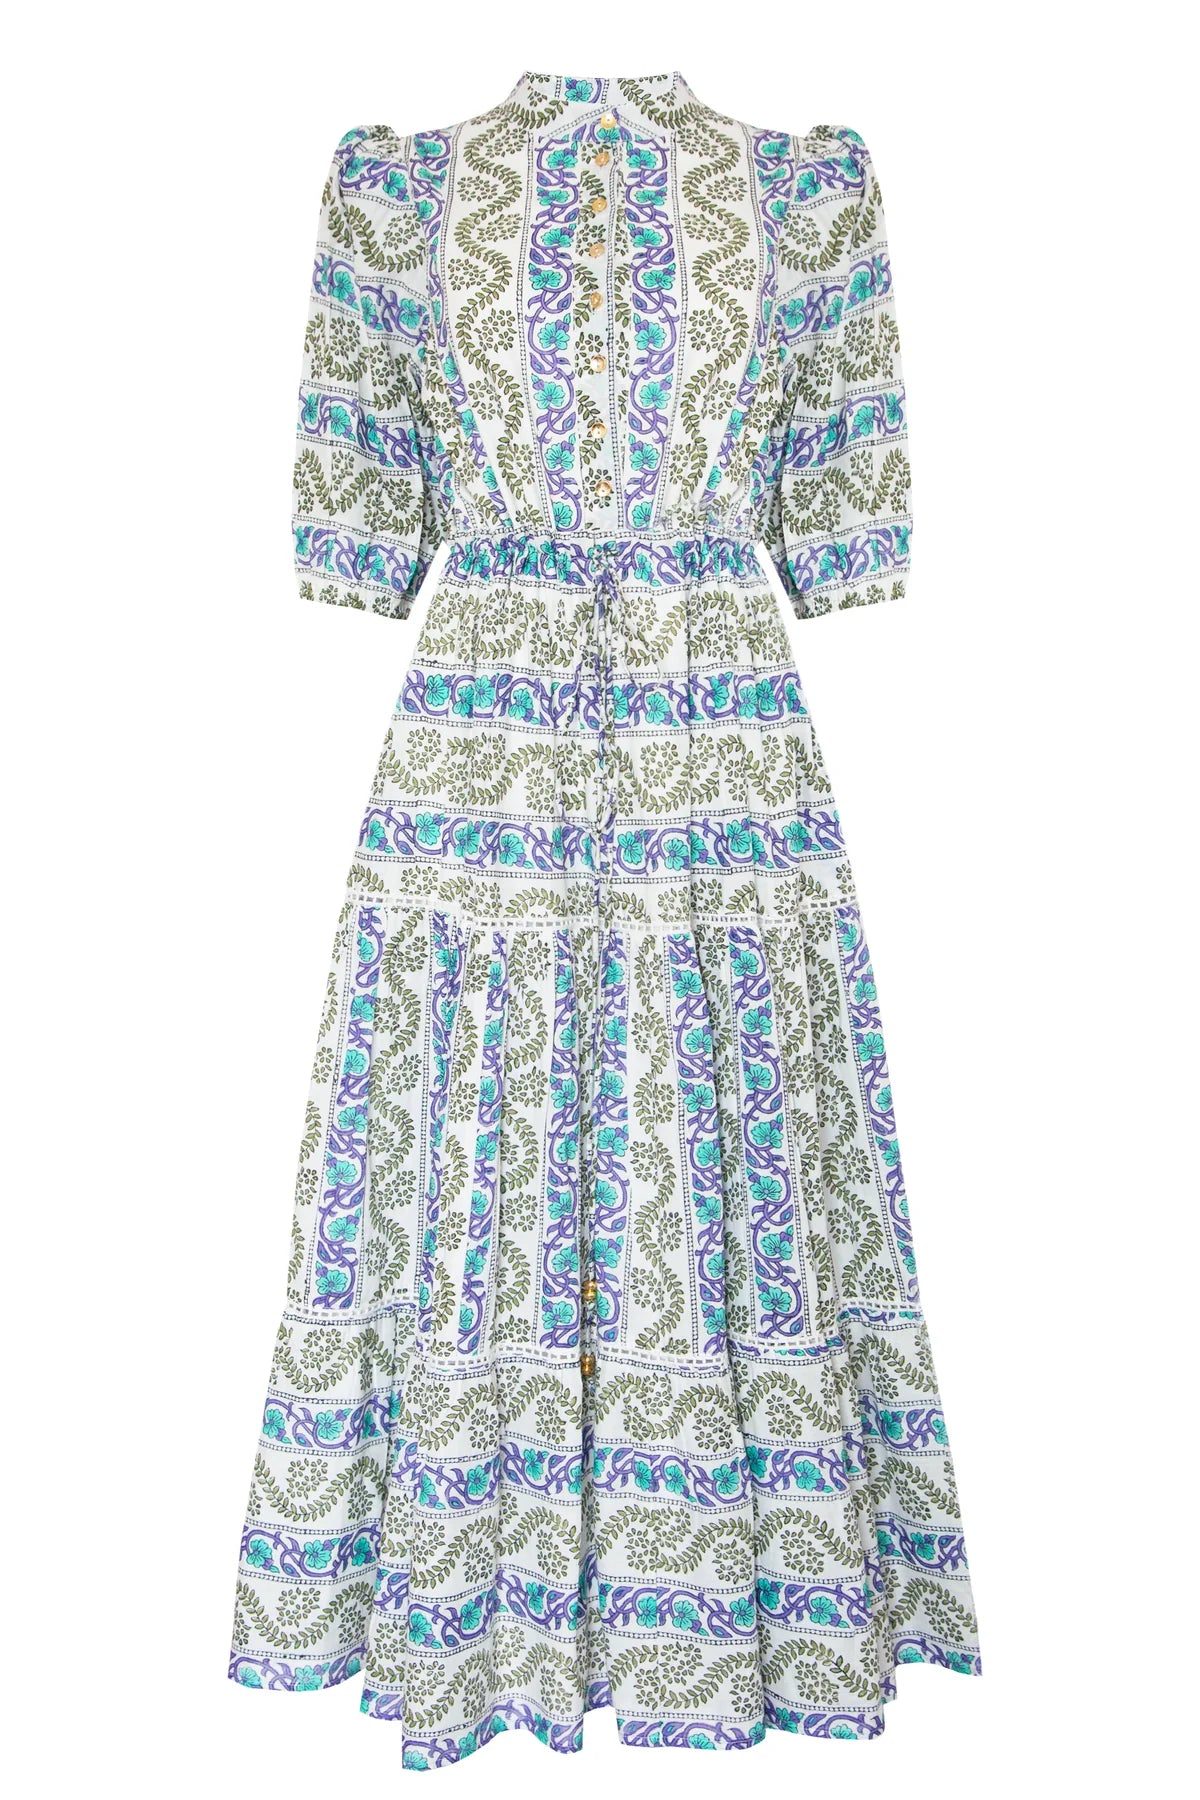 Midi dress with stand up collar half placket and gold button fastenings short sleeves and triple tiered skirt with ladder lace inserts in ecru fabric with green and purple floral print